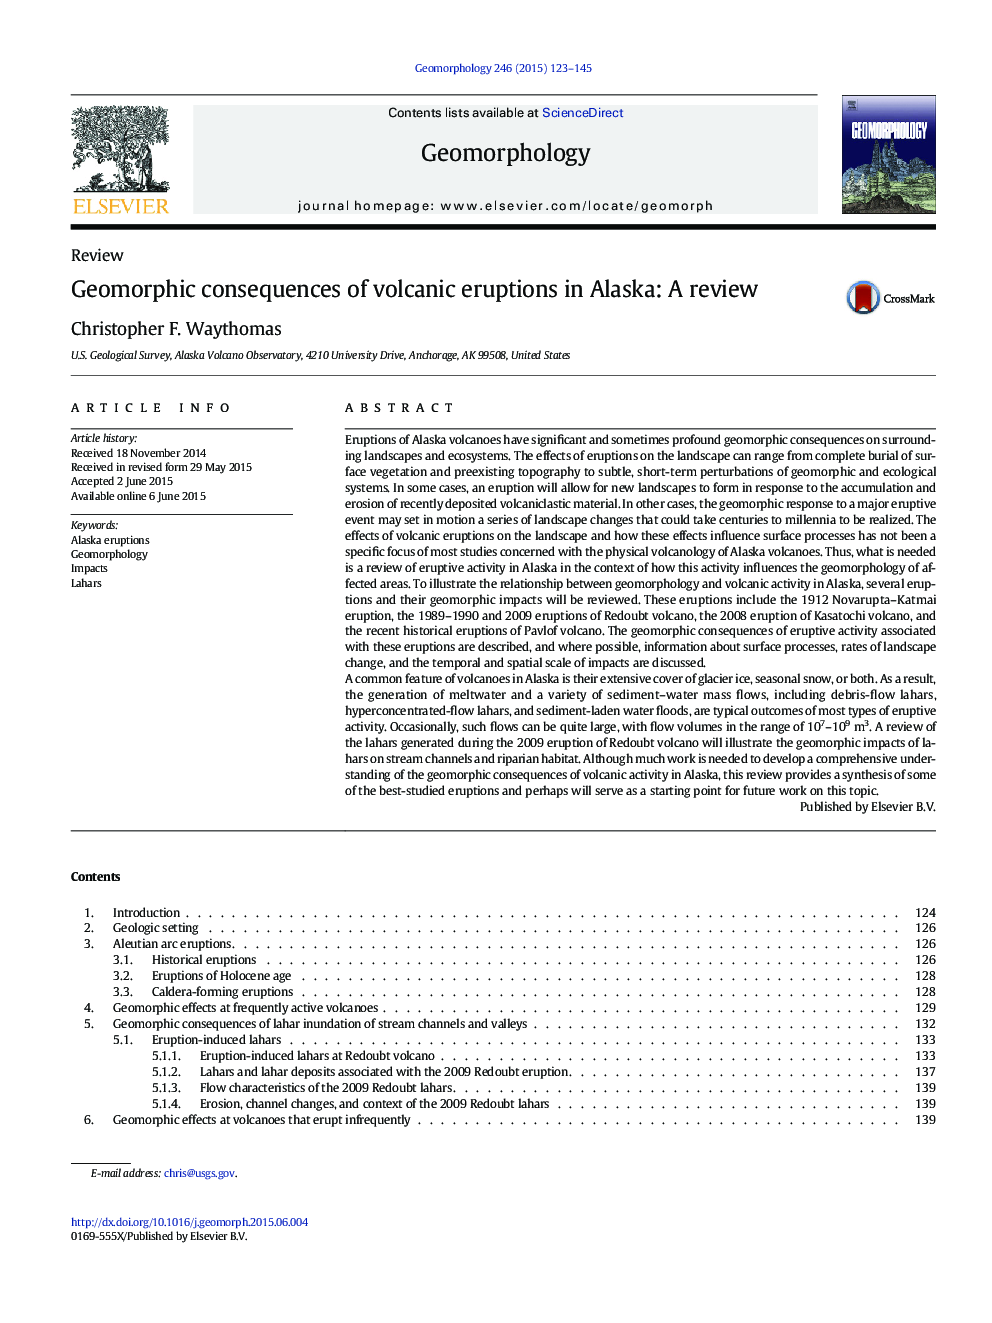 ReviewGeomorphic consequences of volcanic eruptions in Alaska: A review